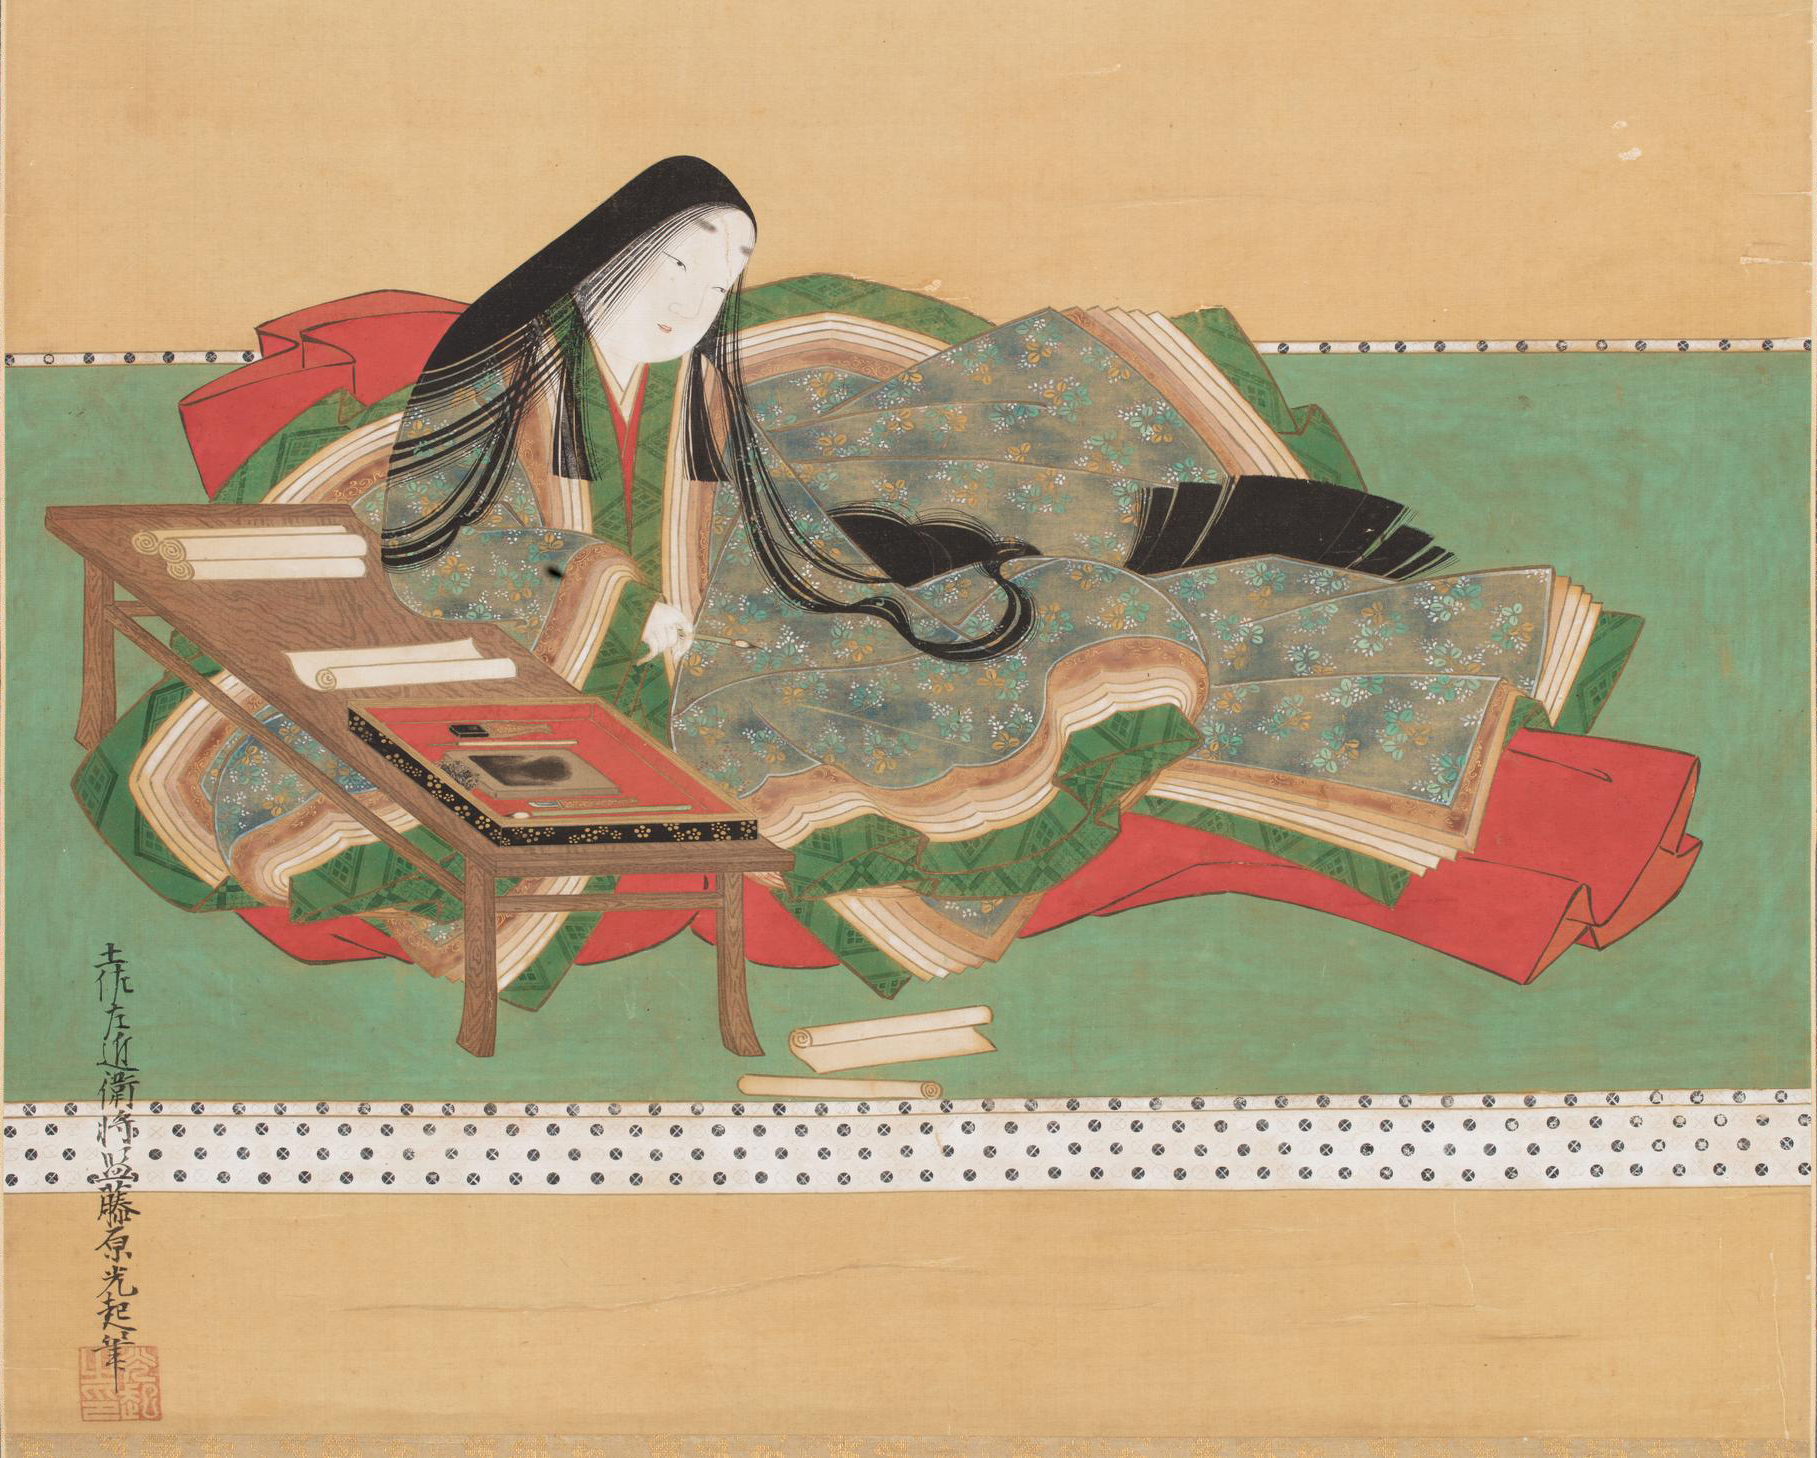 Here is a Tosa style artwork by Tosa Mitsuoki depicting Murasaki Shikibu composing The Tale of Genji. During the Edo period, Murasaki Shikibu, and subsequently The Tale of Genji, became a popular subject for ukiyo-e artists, influencing this Tosa’s artstyle. Murasaki Shikibus impacts are far-reaching, and can still be felt today. (Image Credit: Tosa Mitsuoki (1617 - 1691), Public domain, via Wikimedia Commons
